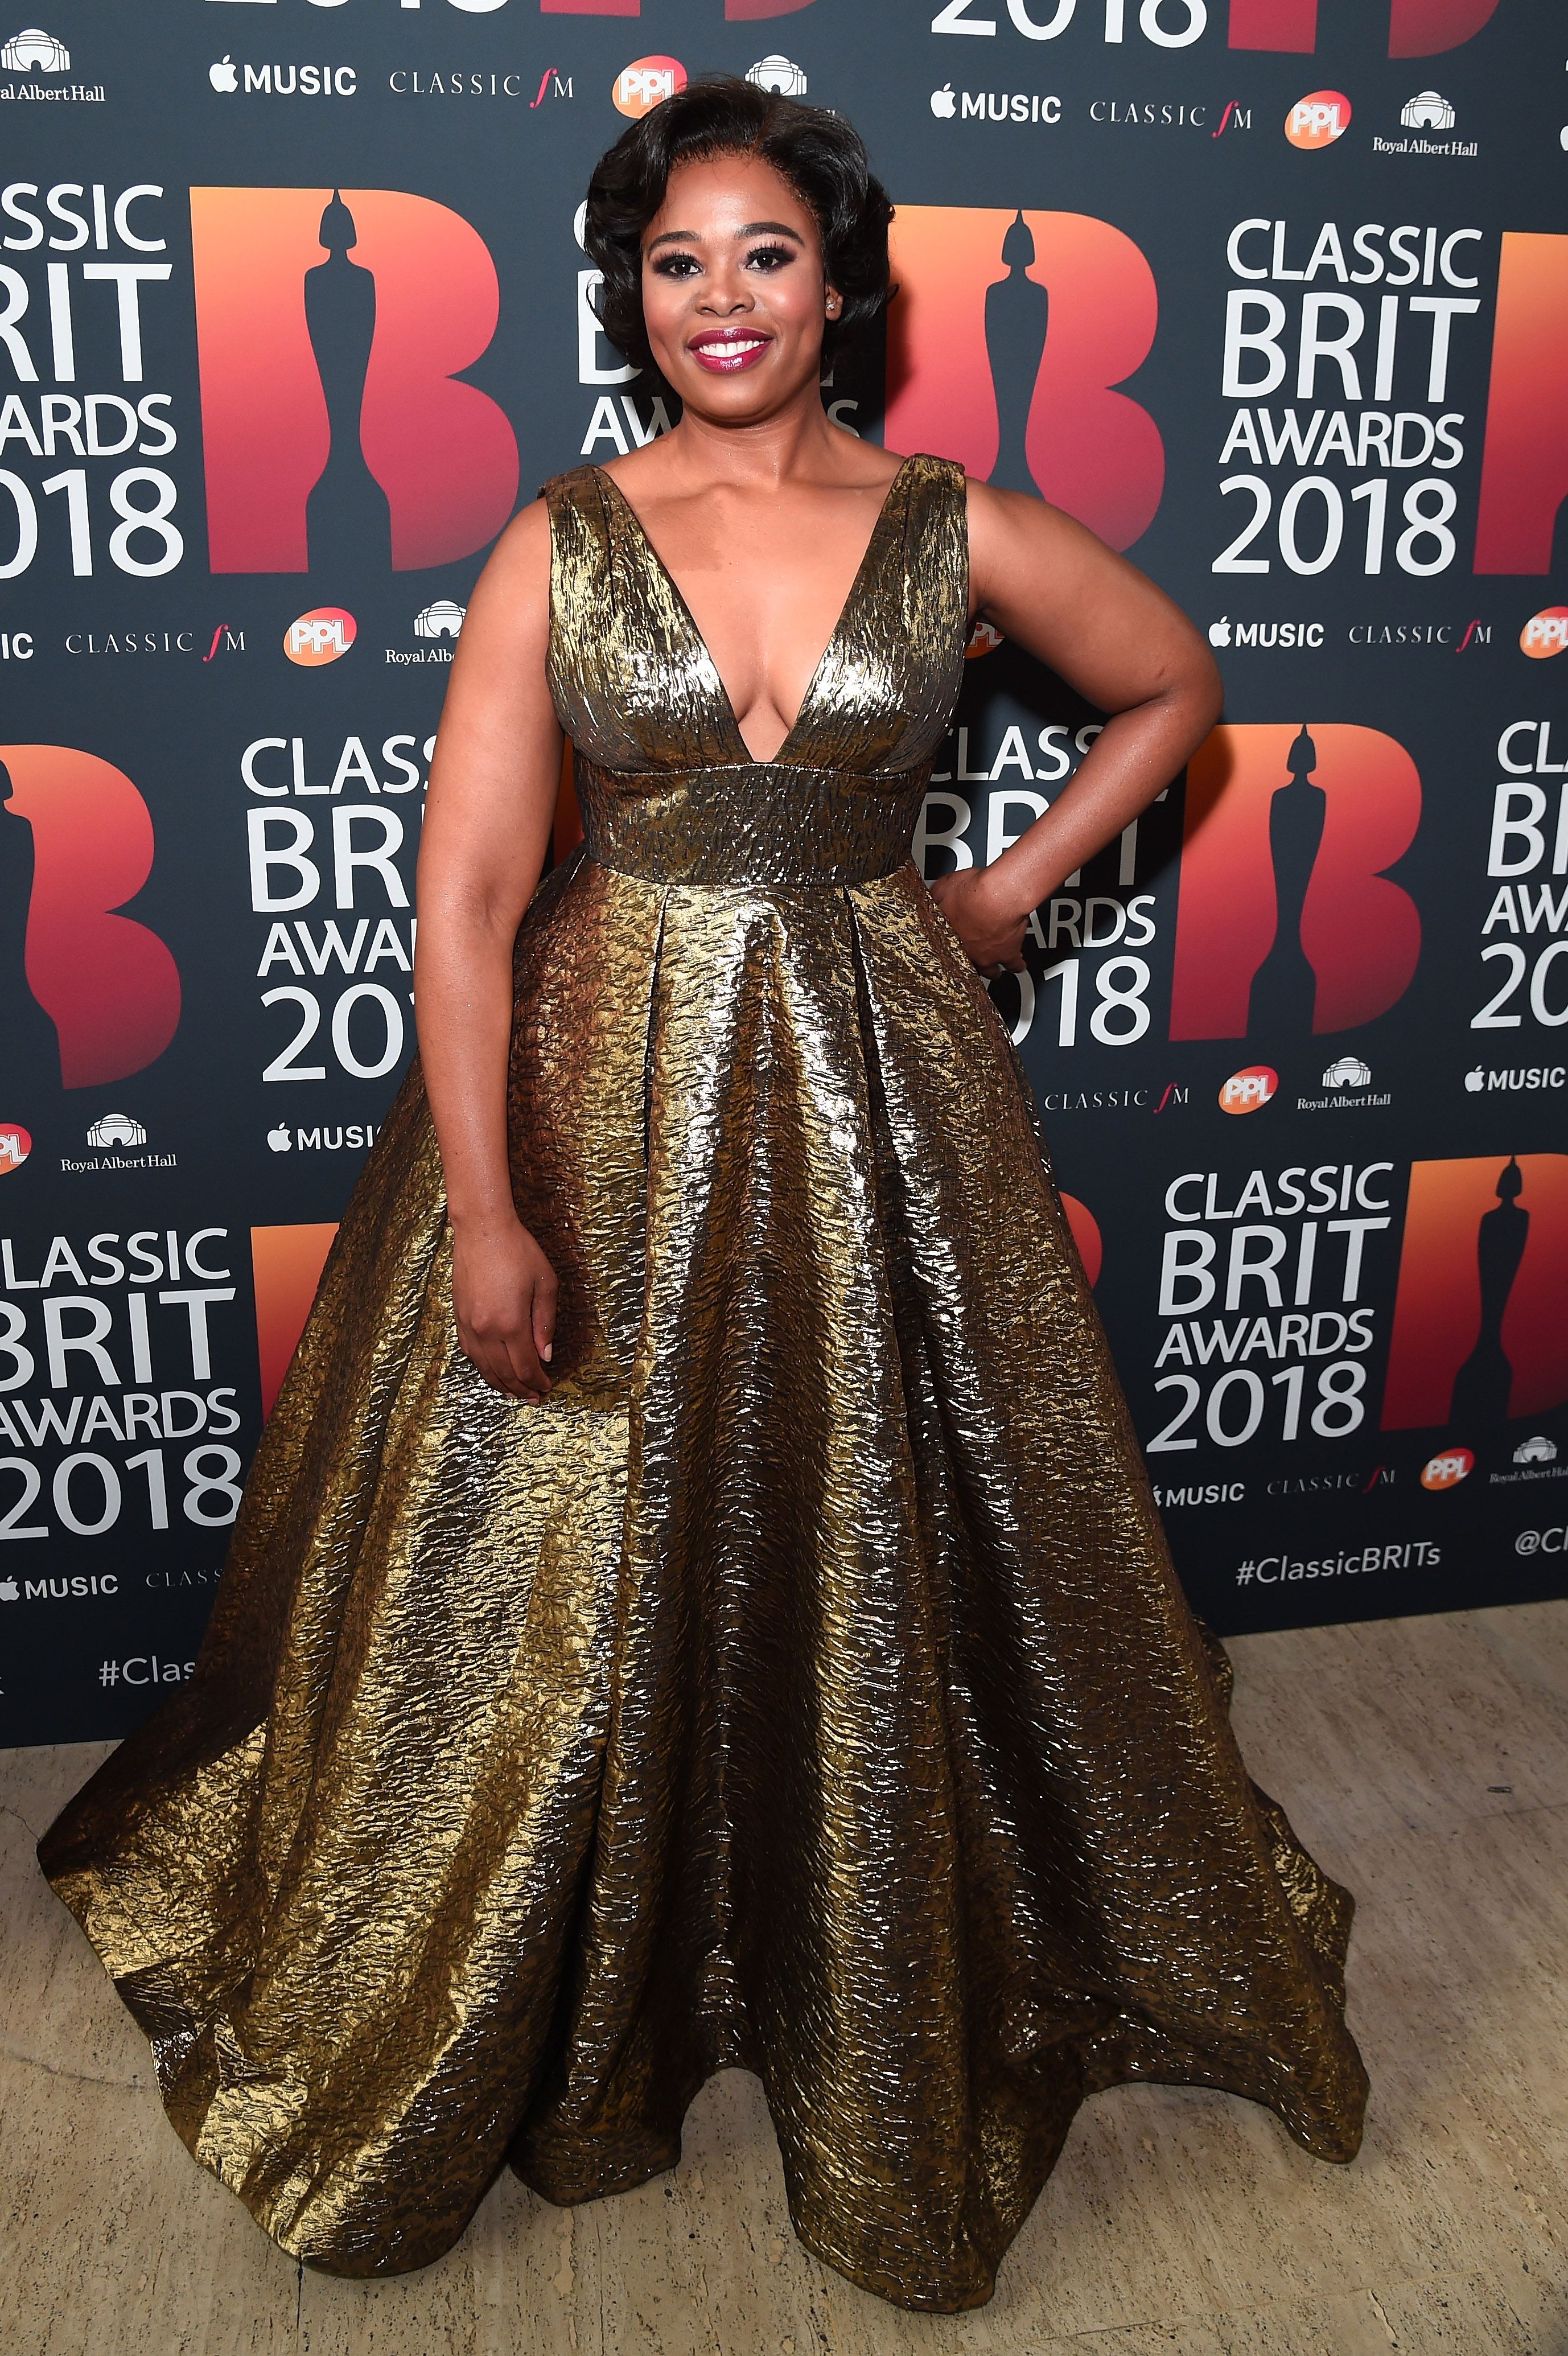 LONDON, ENGLAND - JUNE 13: Pretty Yende attends the 2018 Classic BRIT Awards held at Royal Albert Hall on June 13, 2018 in London, England. (Photo by Eamonn M. McCormack/Getty Images)